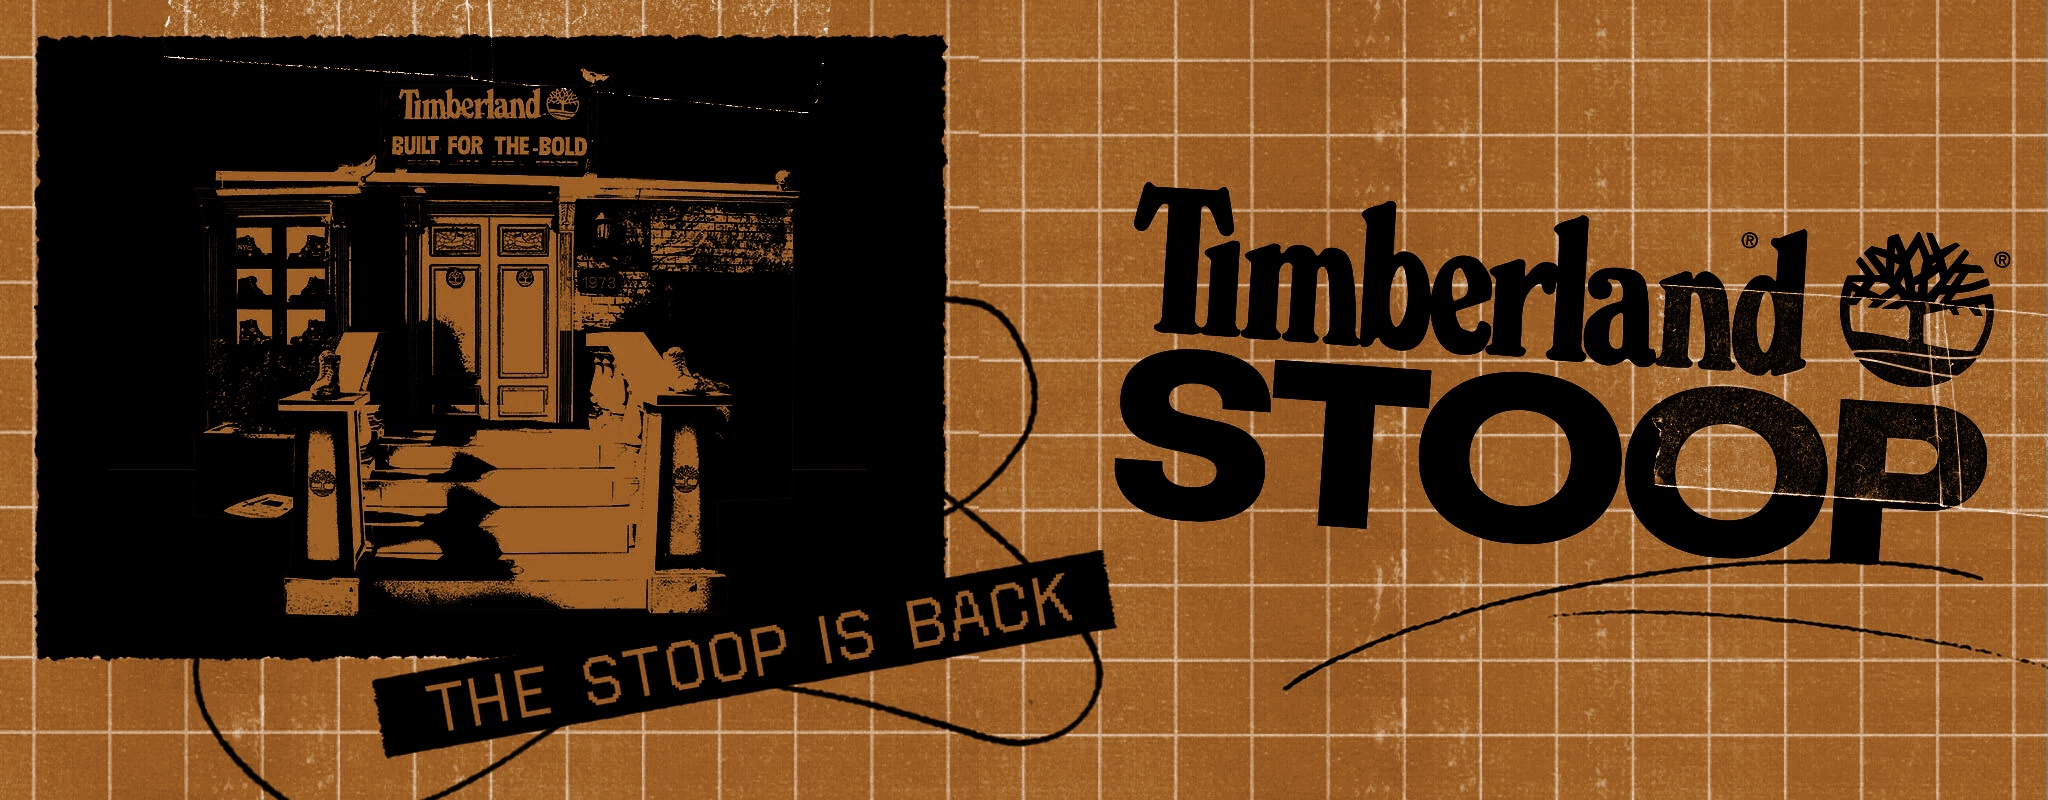 Timberland New York City stoop shadow image with text that reads The Stoop is Back.